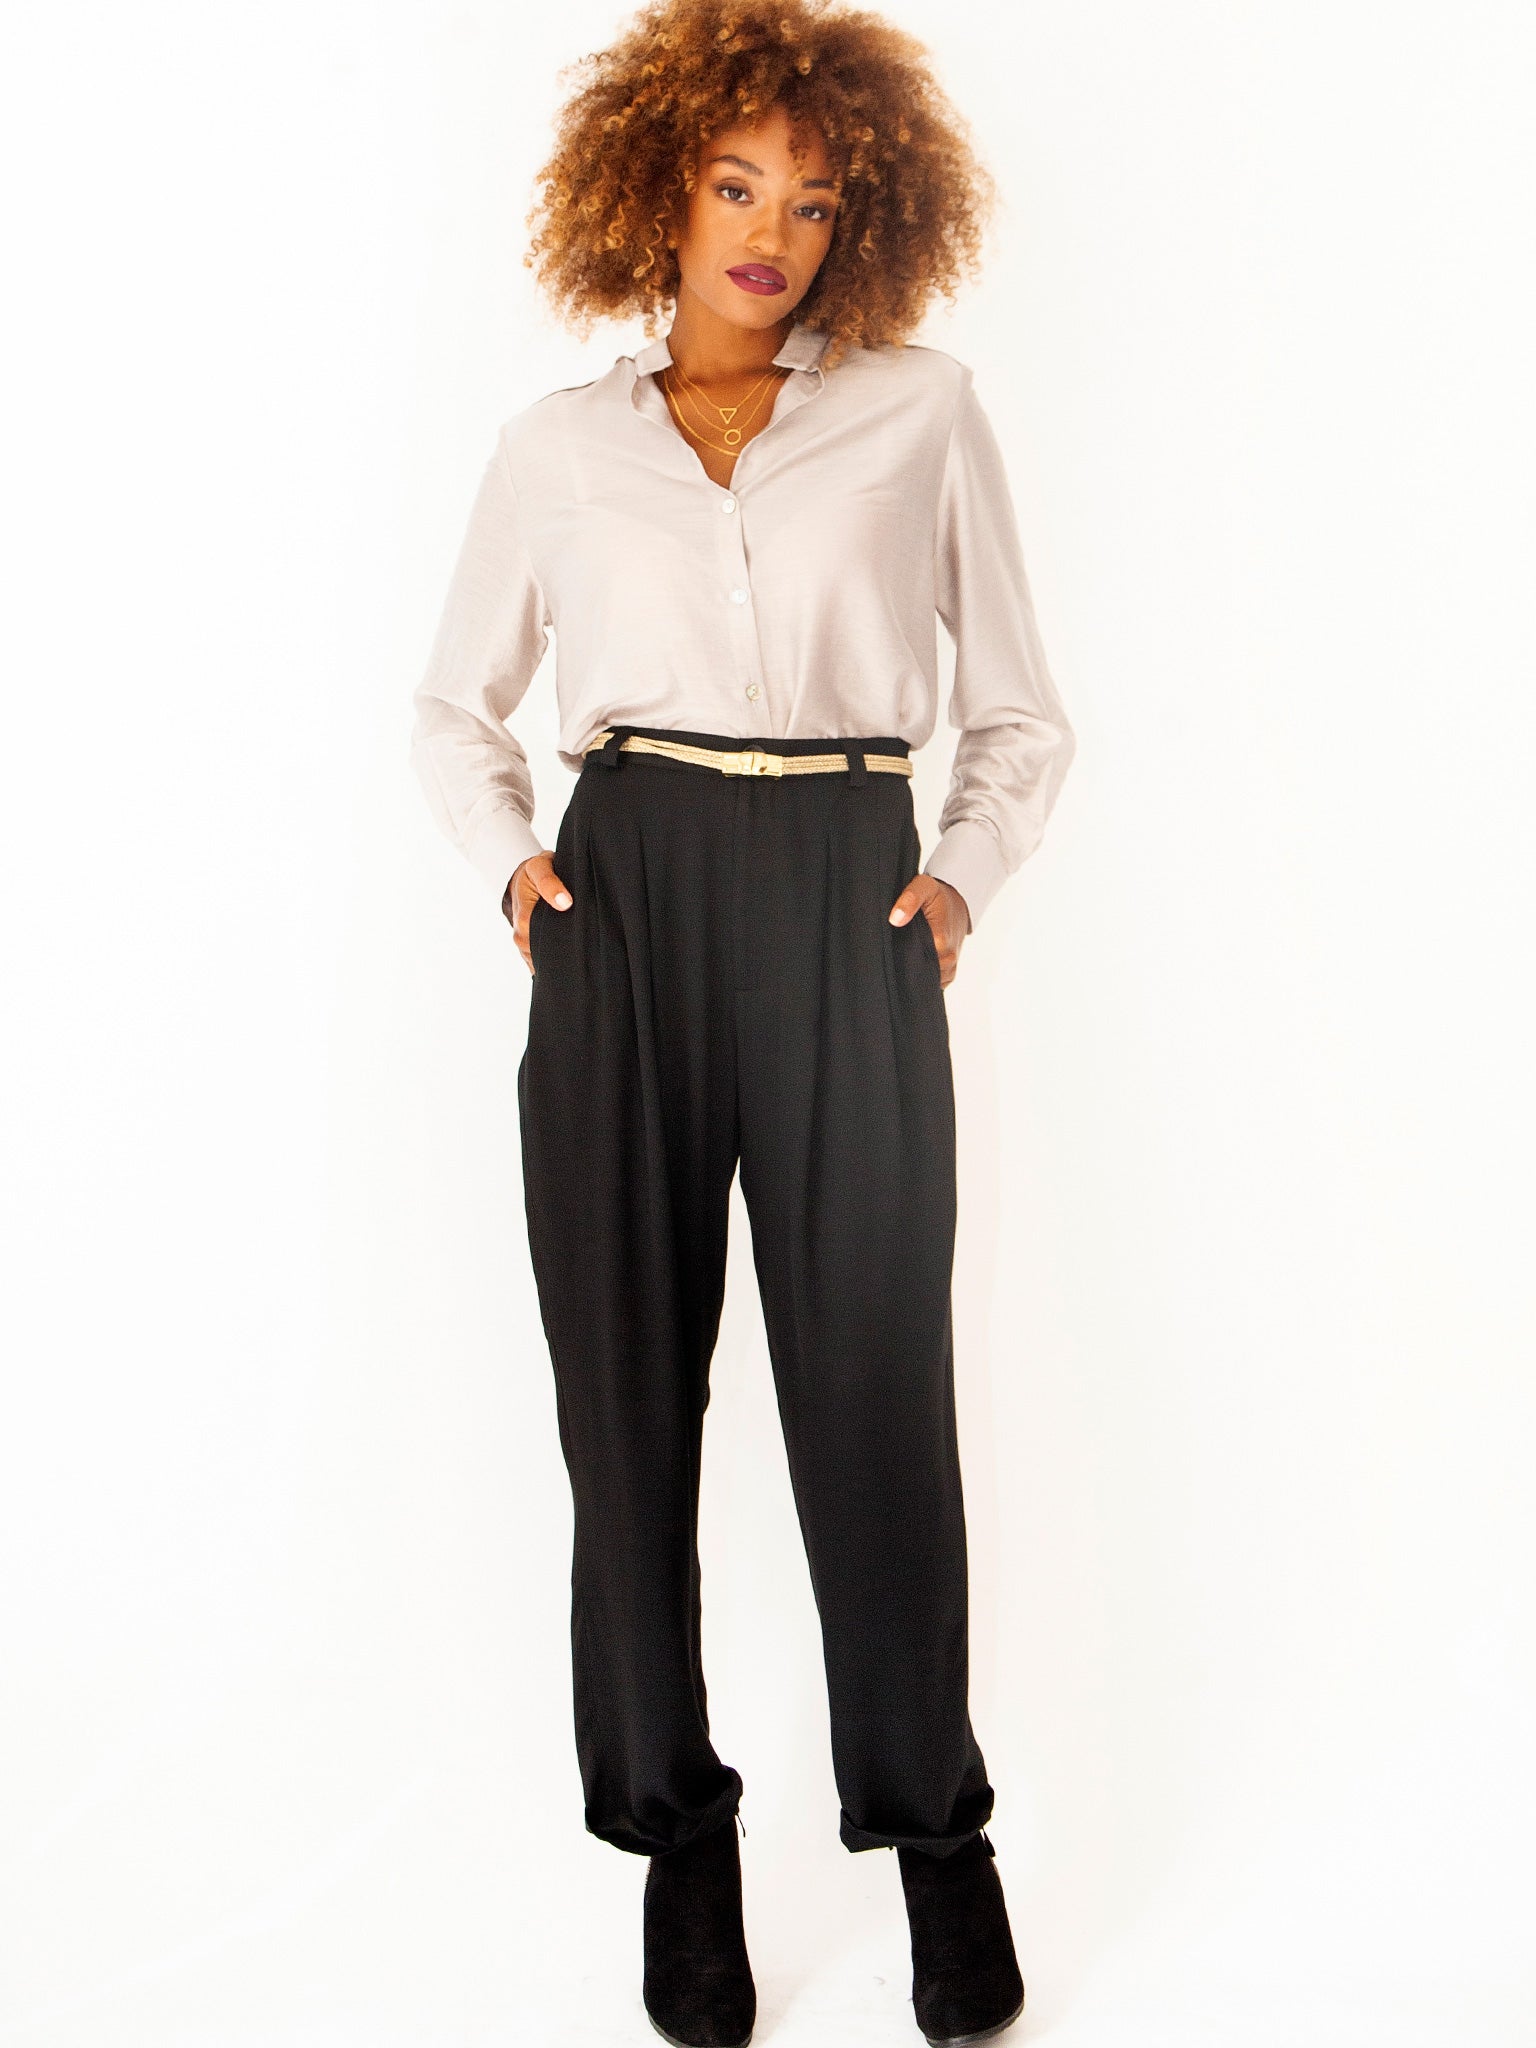 Summer Savings Clearance! Wenini Blazer and Pants Set Women, Women's Solid  Turndown Collar Long Sleeve Pullover Shirt Tops + Pants Trousers Set with  Pockets Navy S # Limited Time Deals Today - Walmart.com